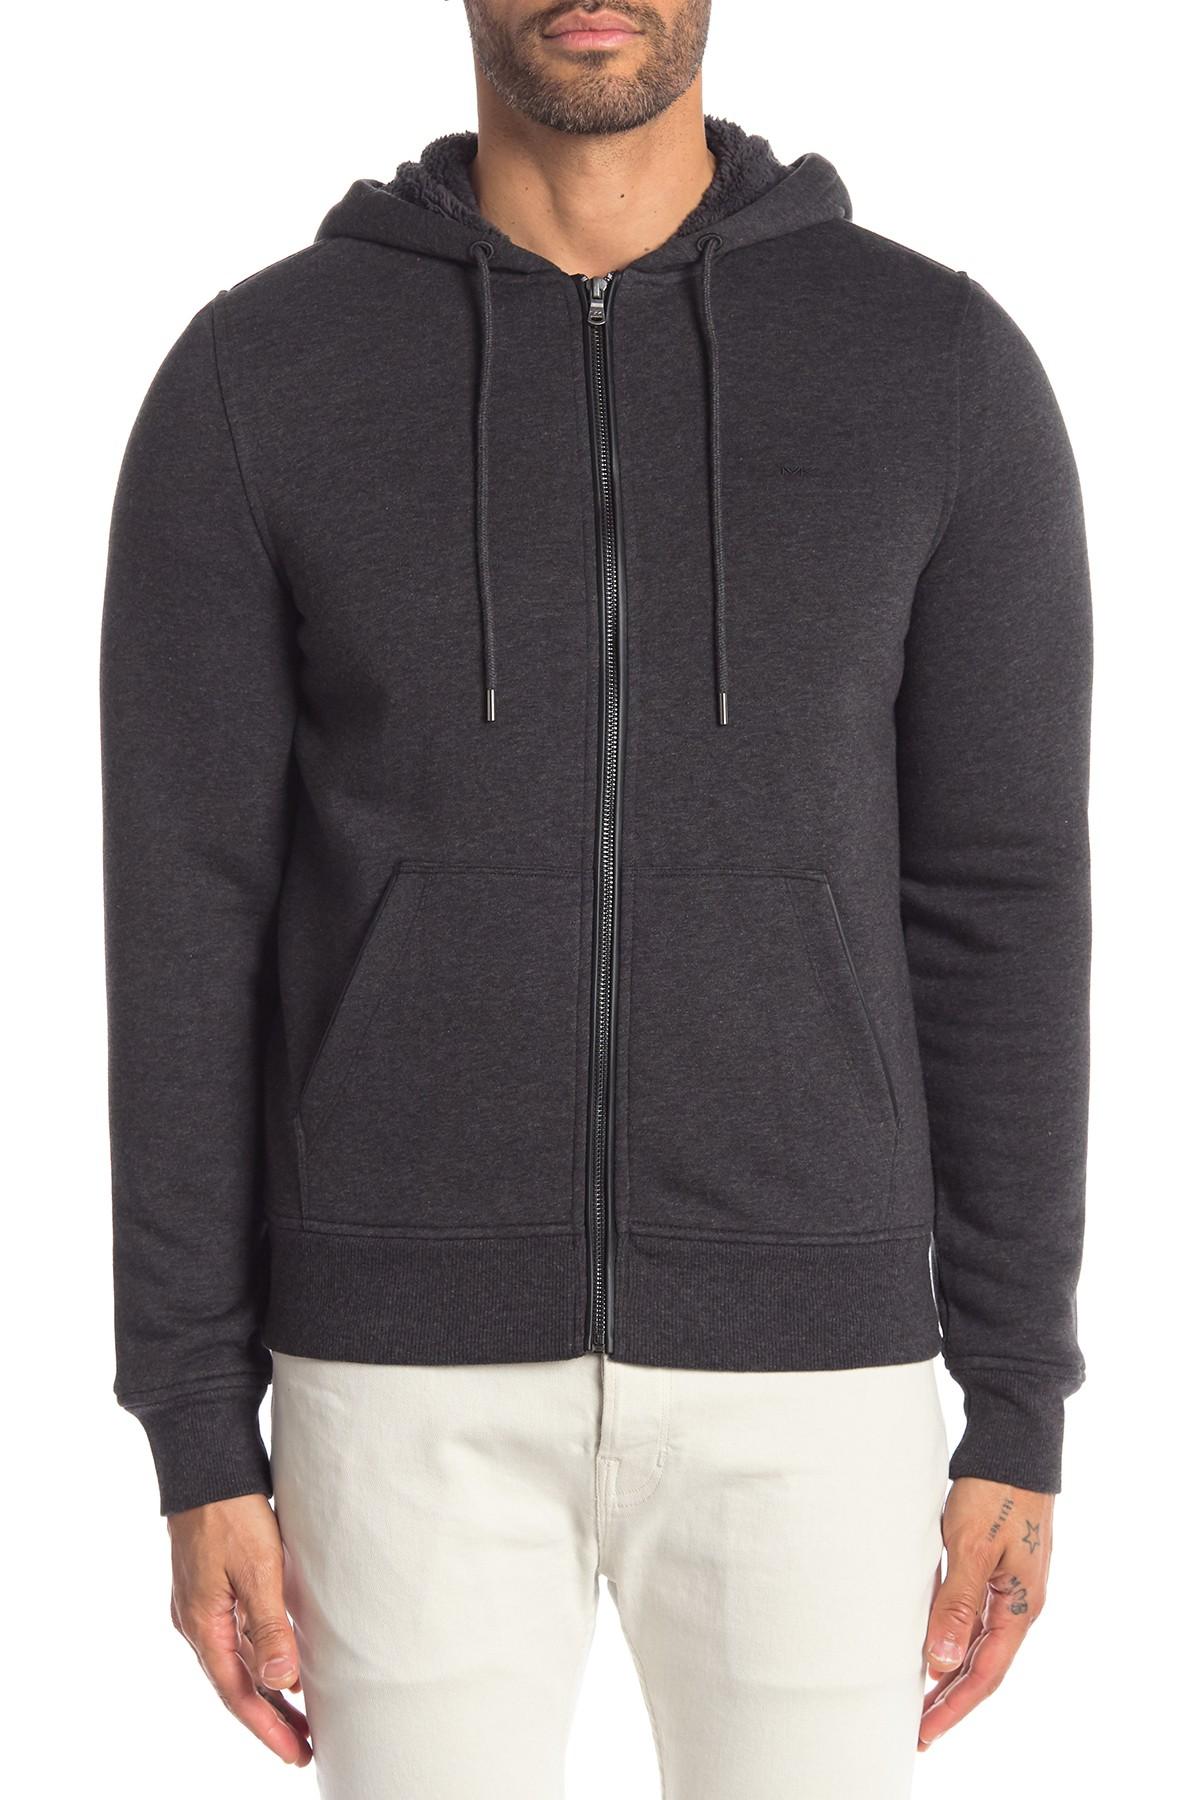 Lyst - Michael Kors Faux Shearling Lined Hoodie With Faux Leather Trim ...